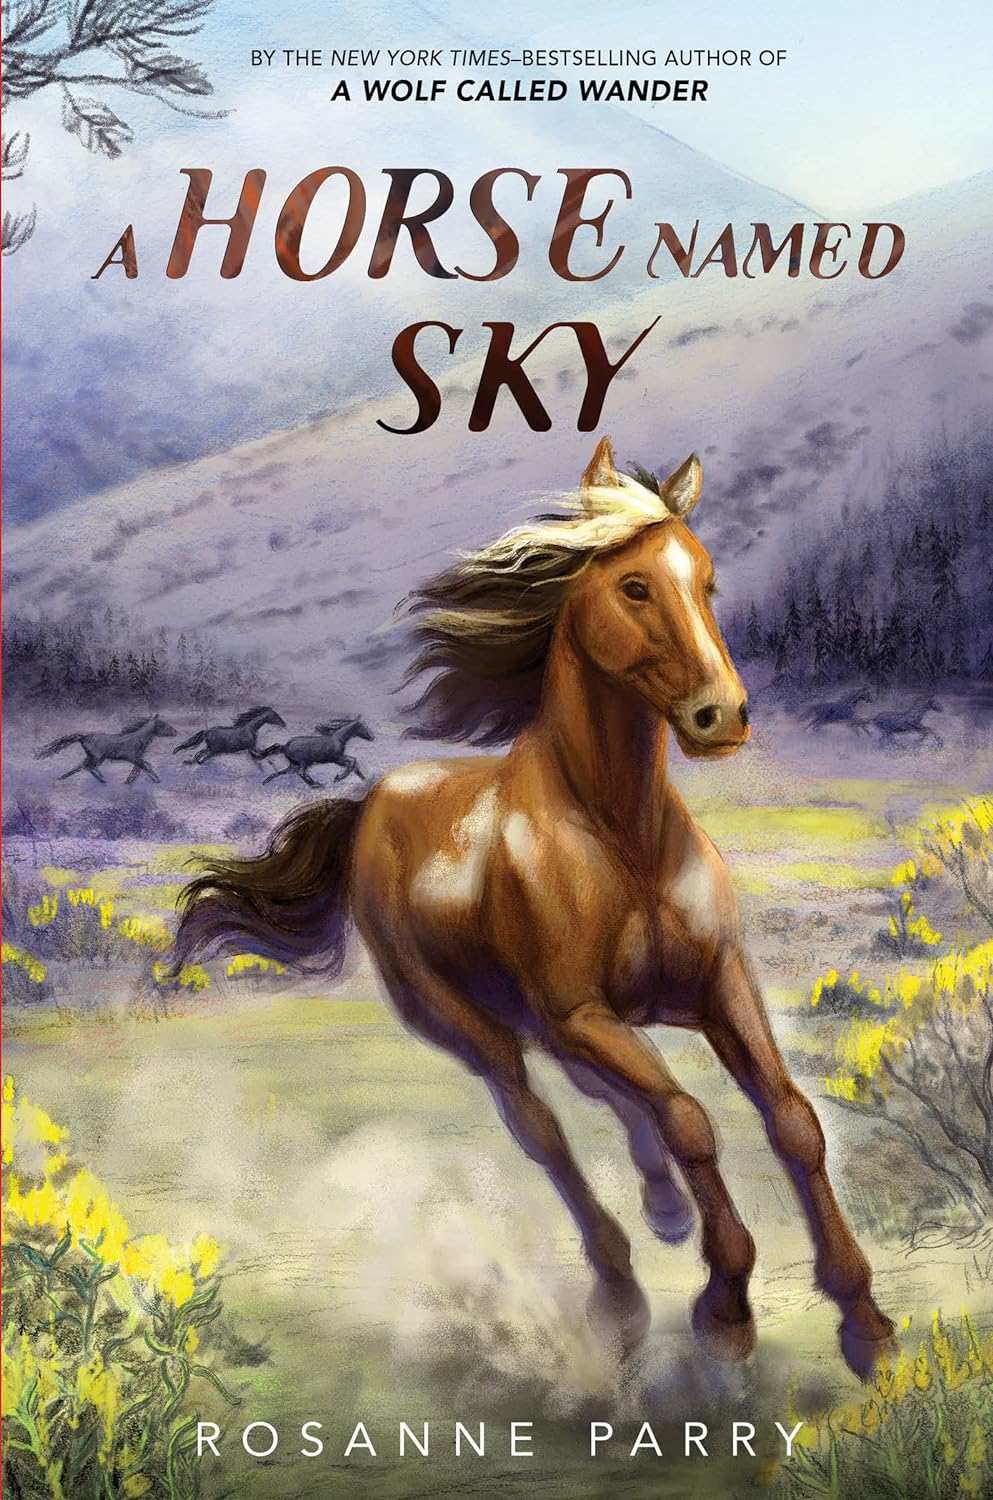 A Horse Named Sky - by Rosanne Parry (Hardcover)